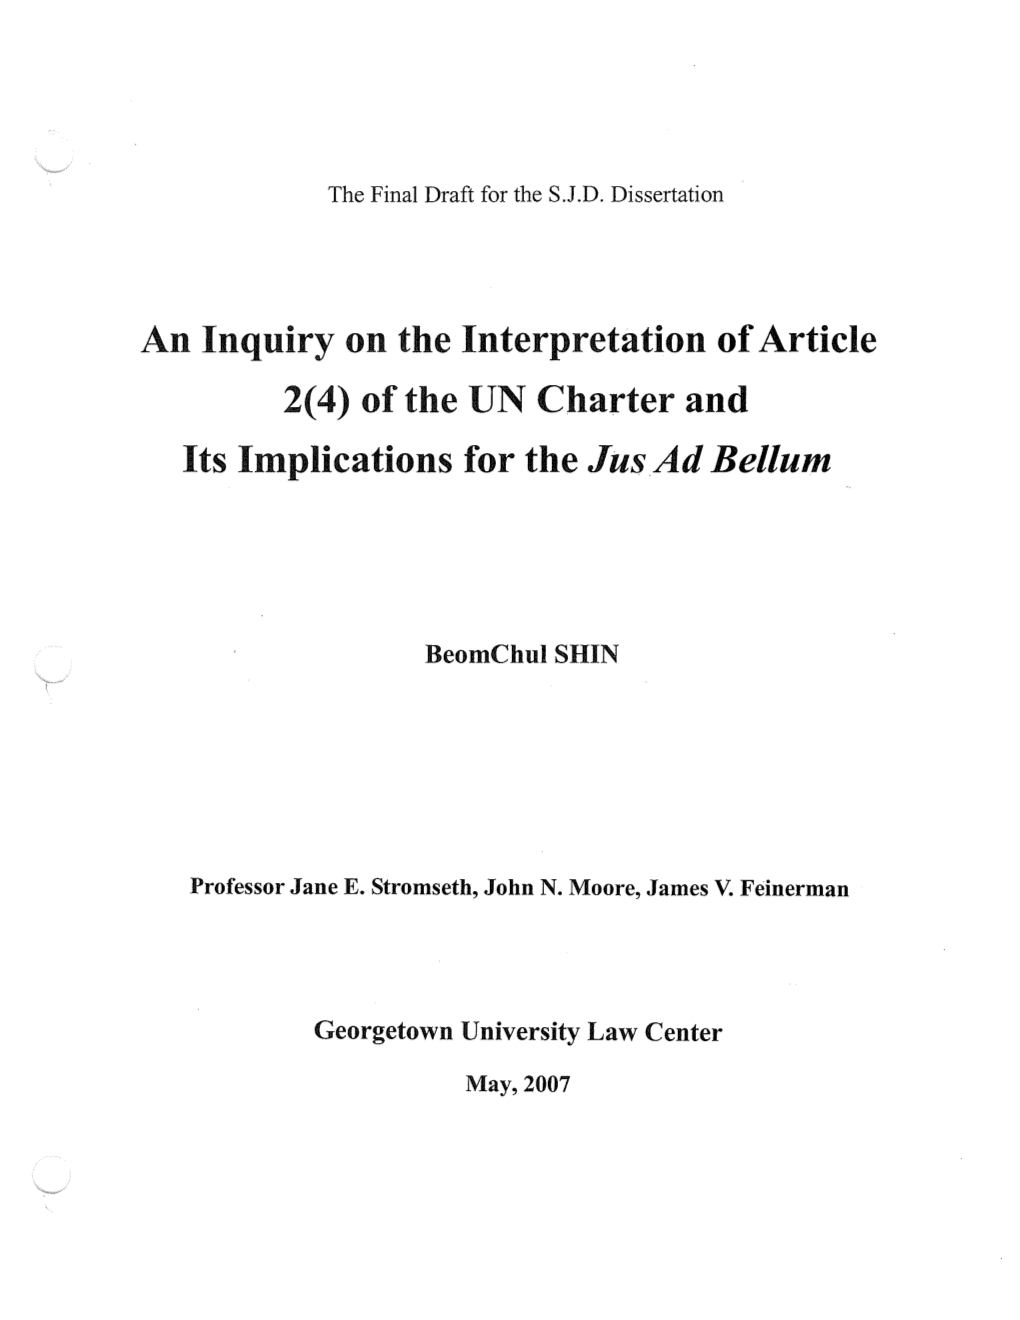 An Inquiry on the Interpretation of Article 2( 4) of the UN Charter and Its Implications for the Jus Ad Bellum